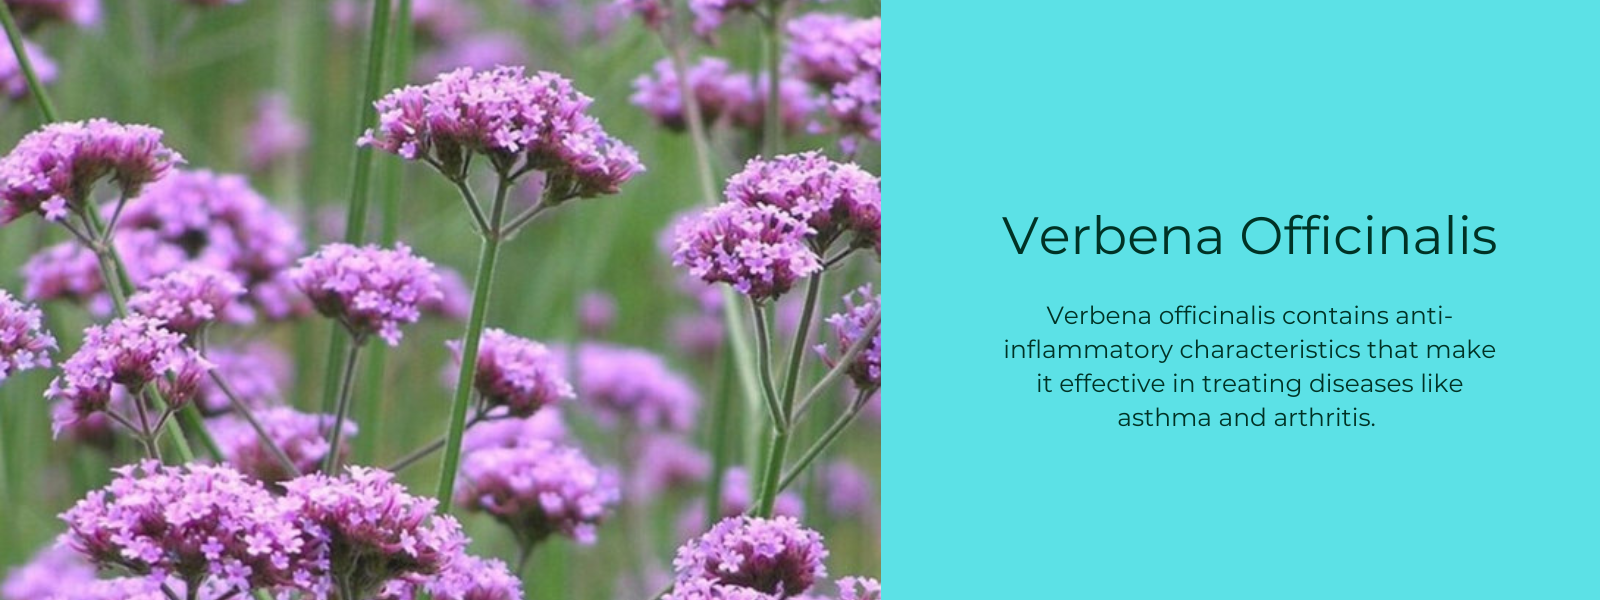 Verbena Officinalis- Health Benefits, Uses and Important Facts